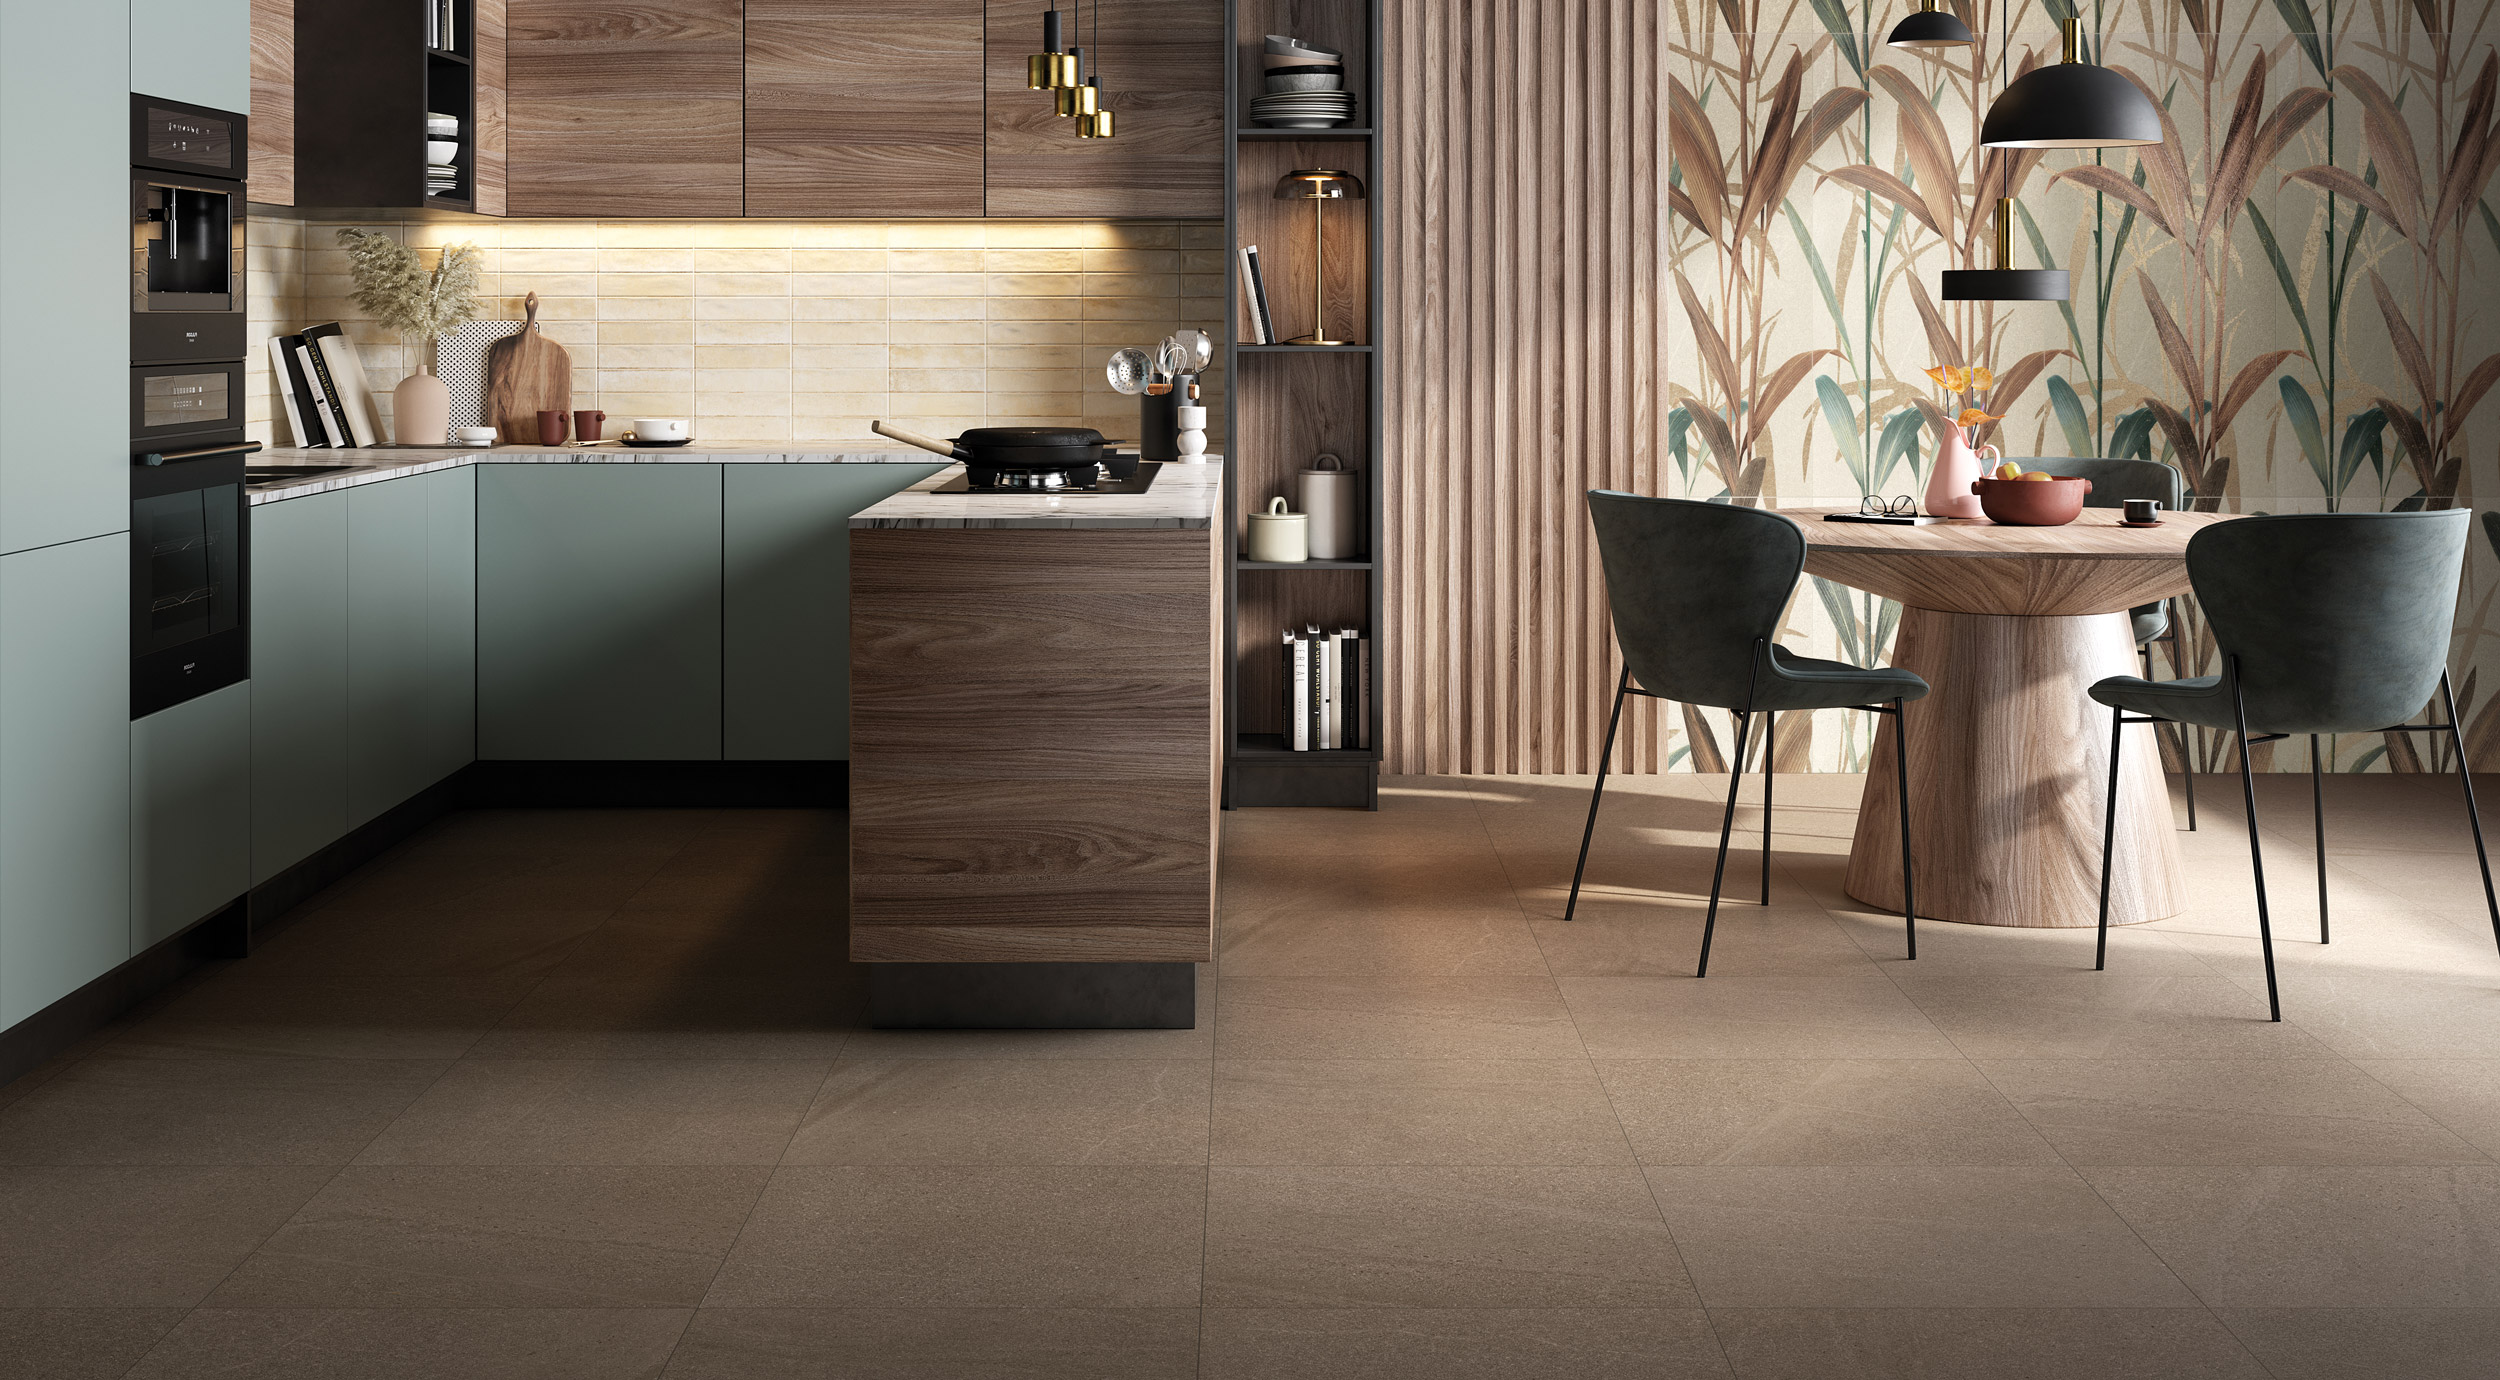 Kitchen tiles Baltic by Ceramica Rondine